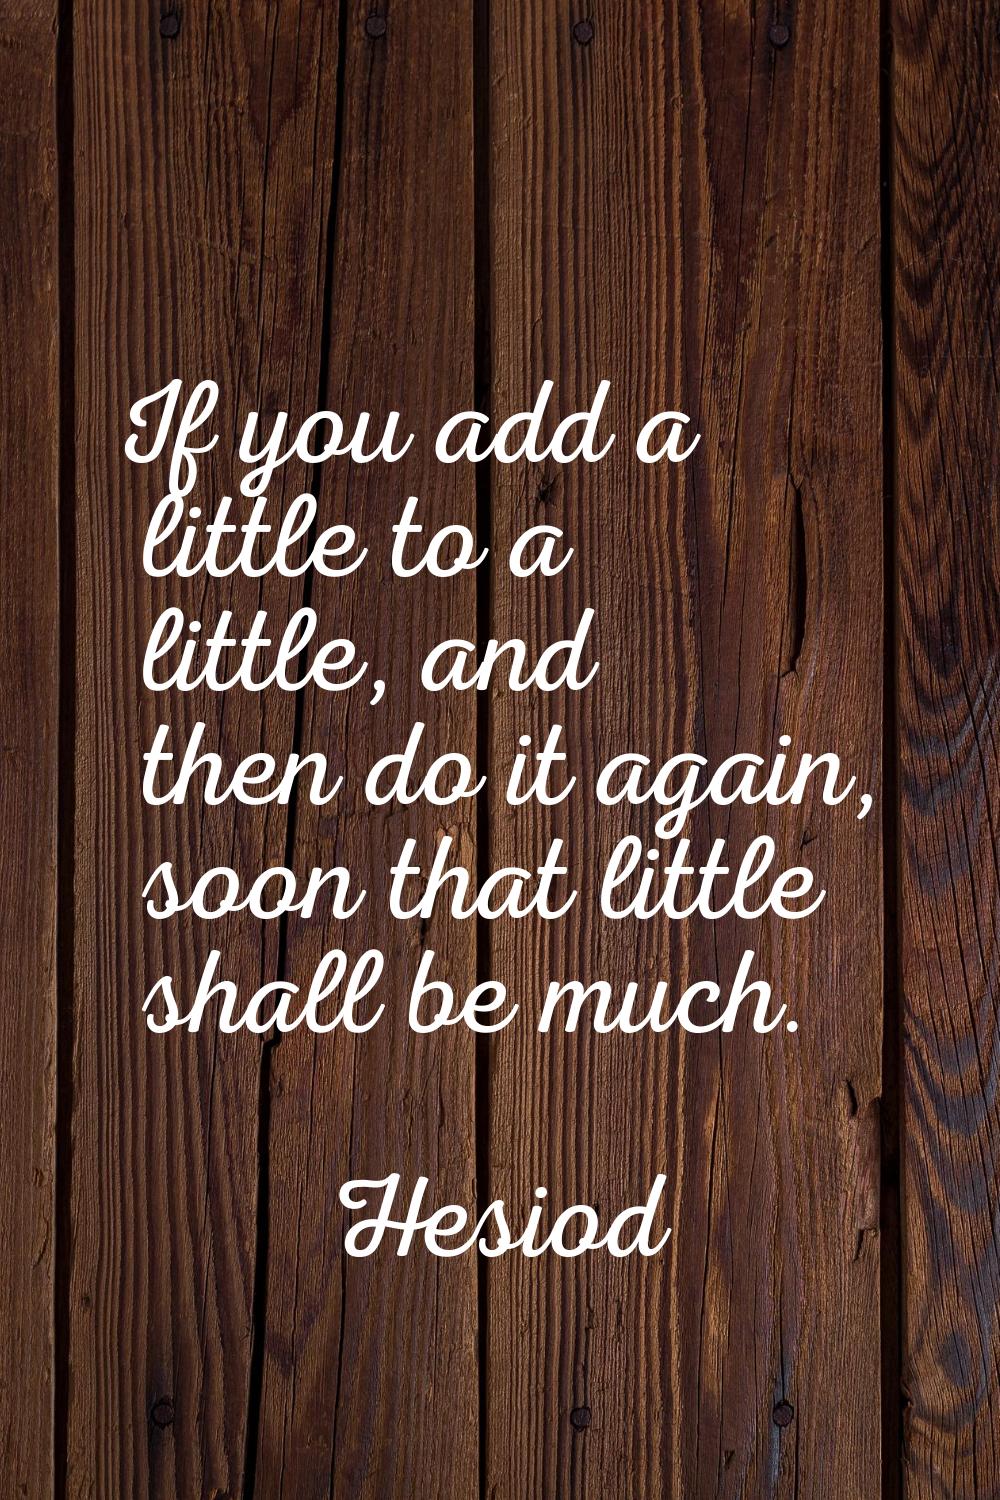 If you add a little to a little, and then do it again, soon that little shall be much.